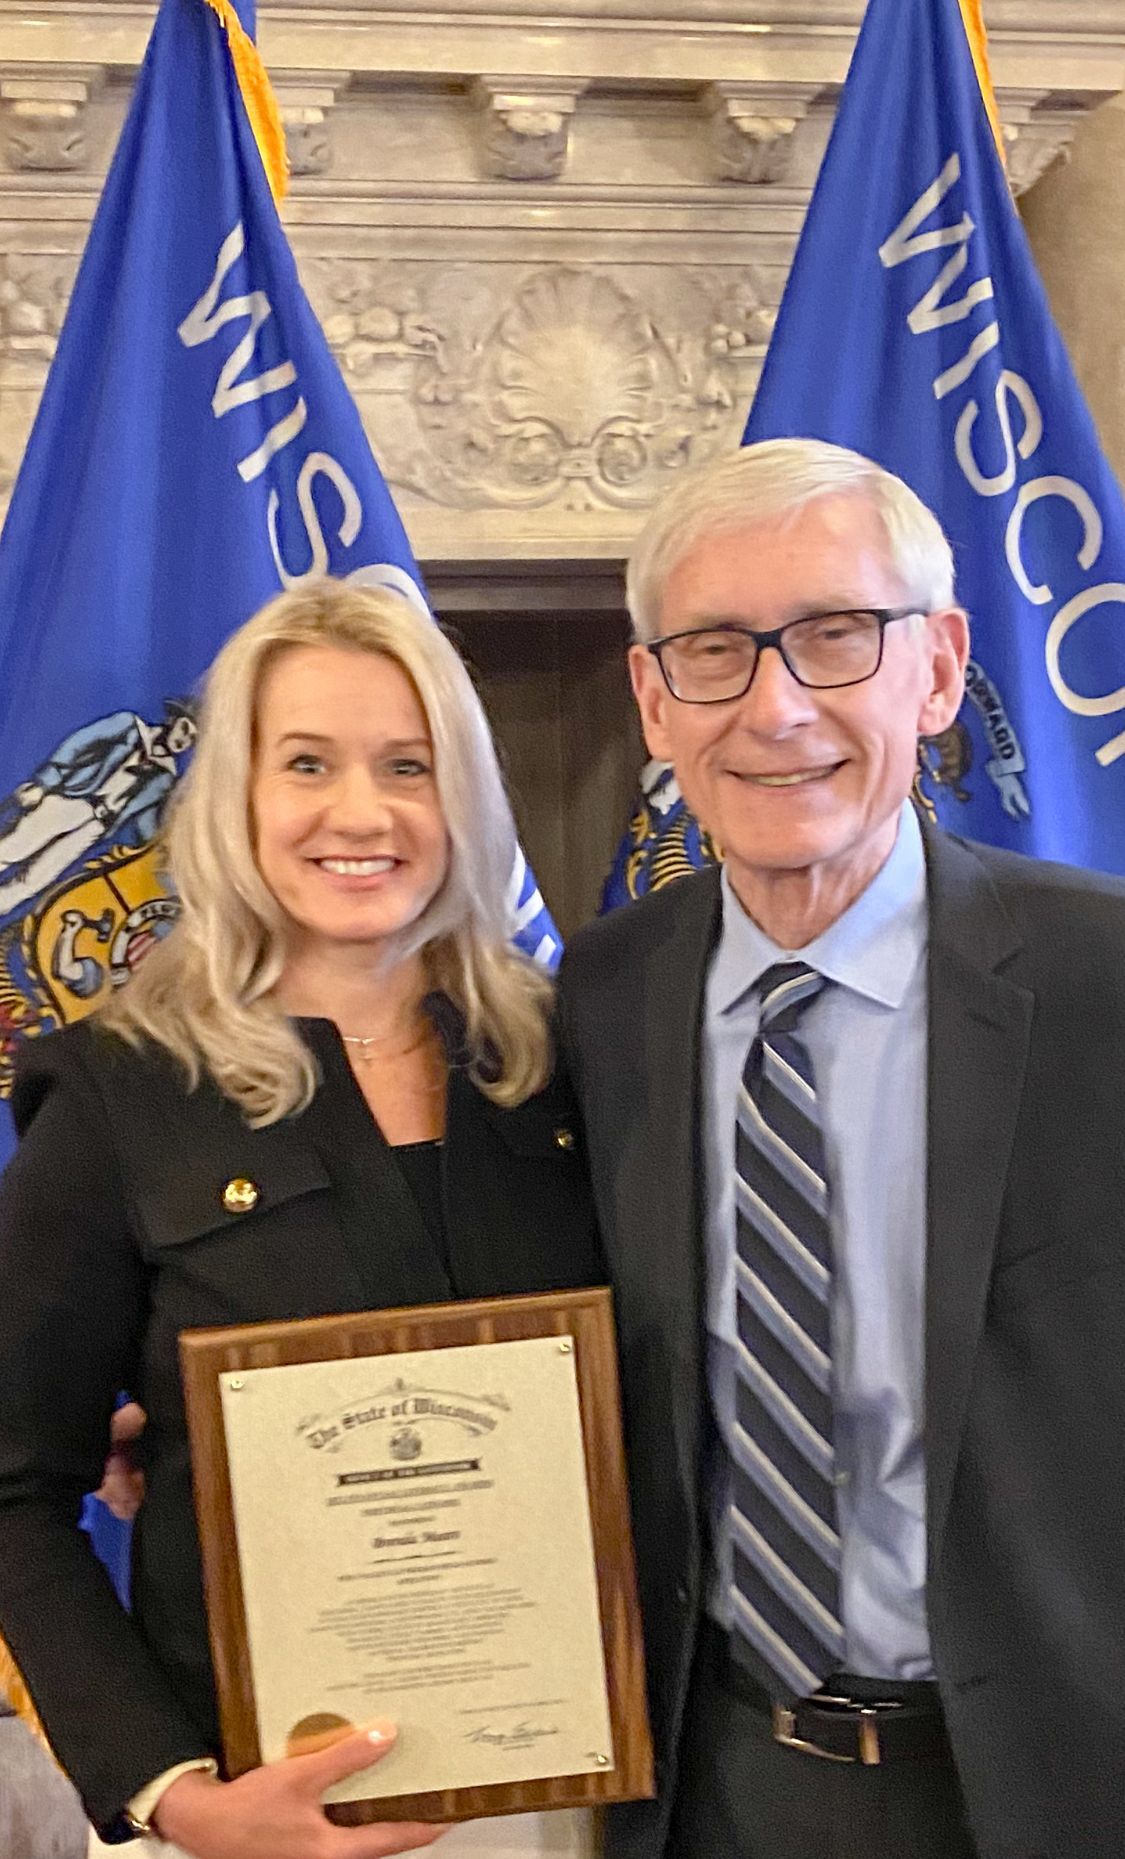 Brenda Mears holding her plaque and standing next to Governor Evers with two Wisconsin flags behind them